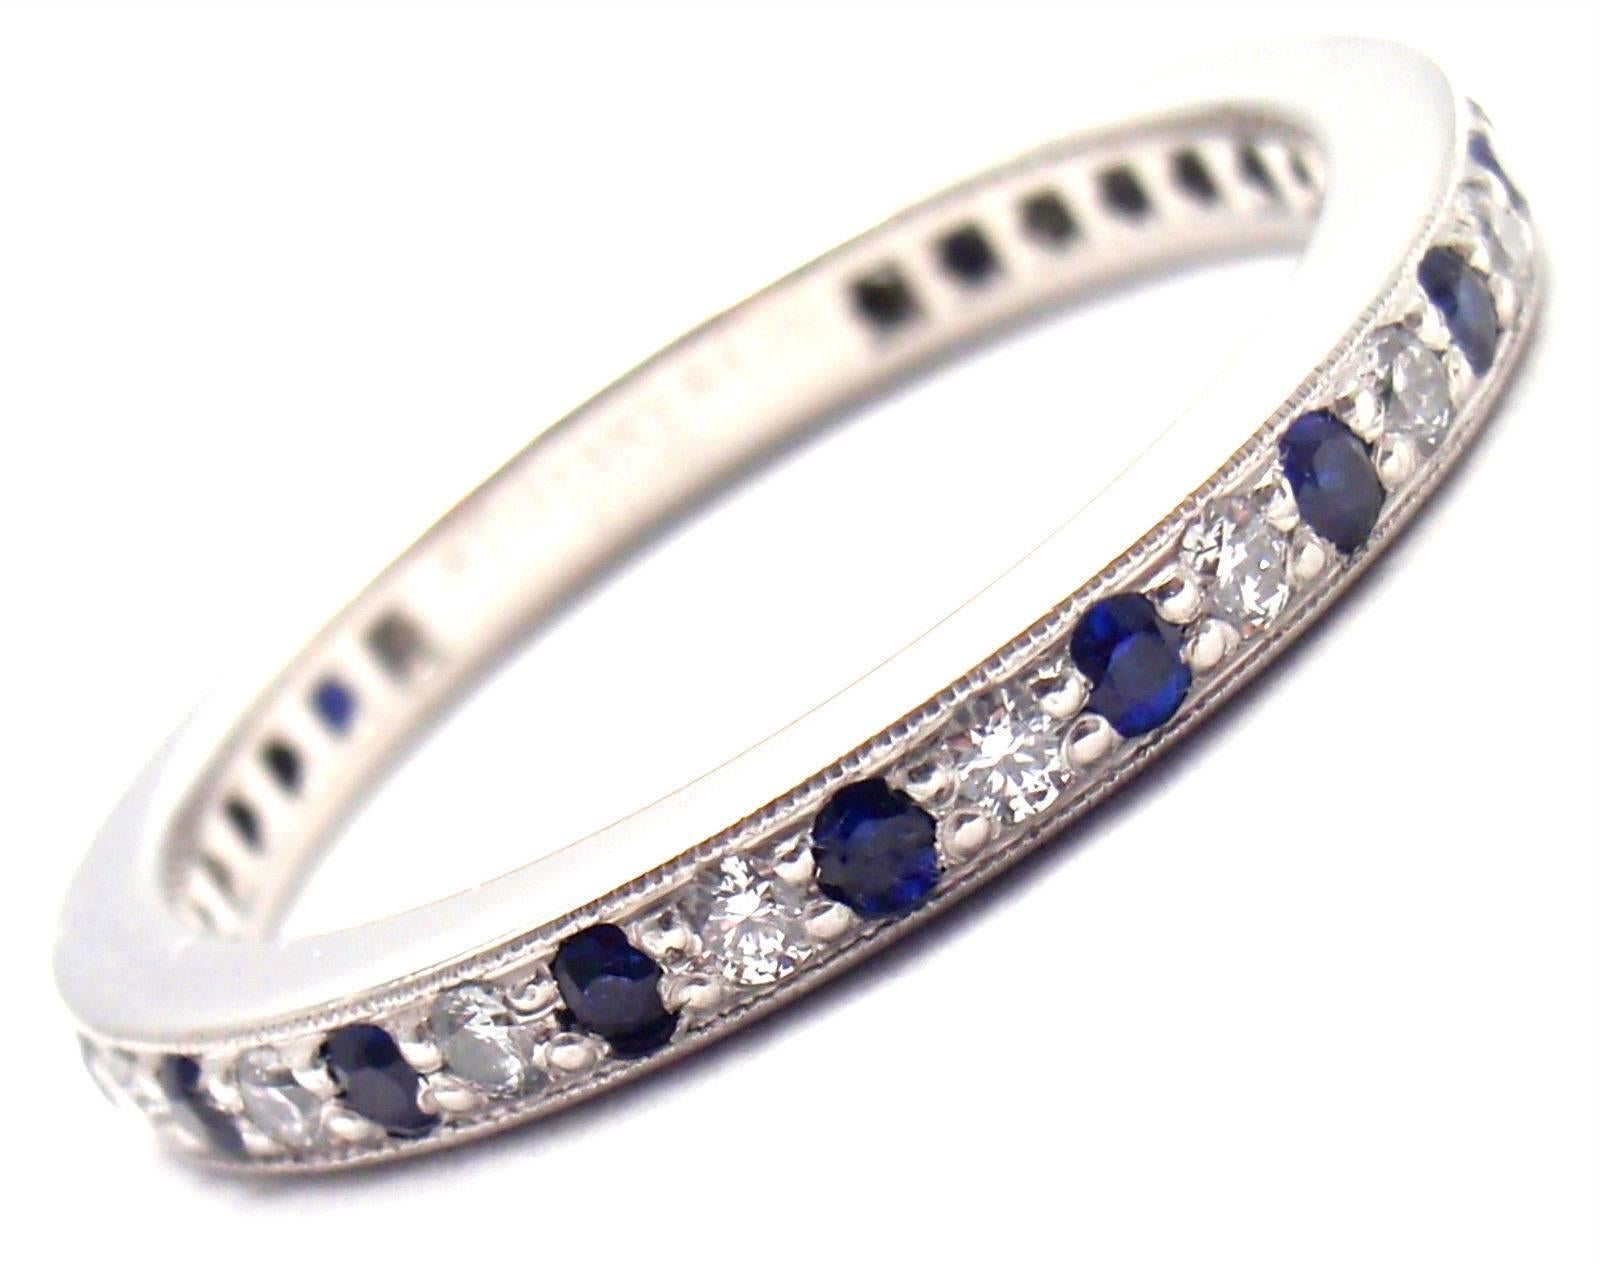 Platinum Diamond And Sapphire Legacy Band Ring by Tiffany & Co.
With Round brilliant cut diamonds VS1 clarity, G color total weight approx. .20ct
Round sapphires .26ct
Measurements: 
Ring Size: 5 1/2
Weight: 3.7 grams
Band Width: 2mm
Stamped